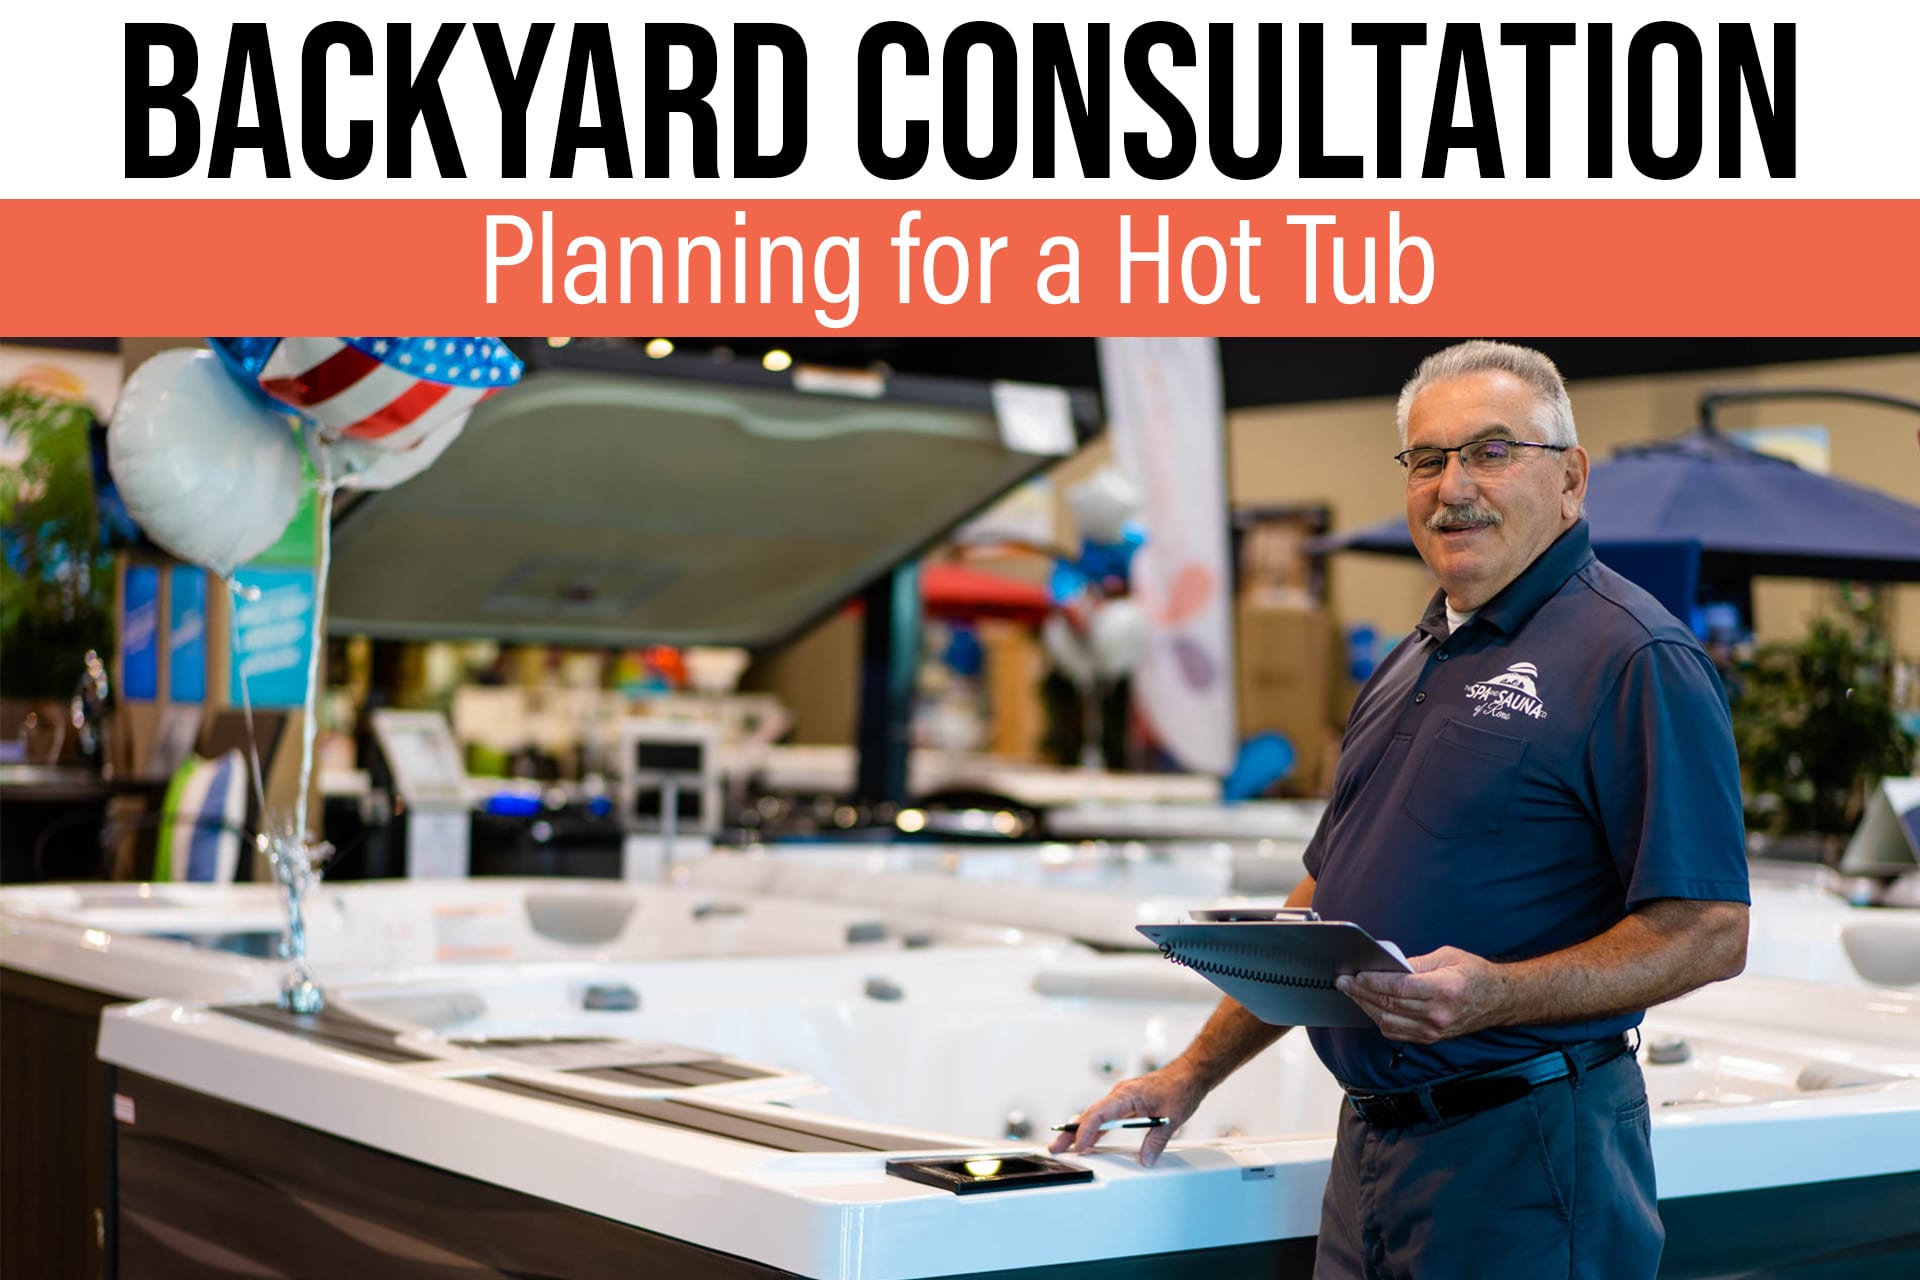 Consultation – Planning for a Hot Tub